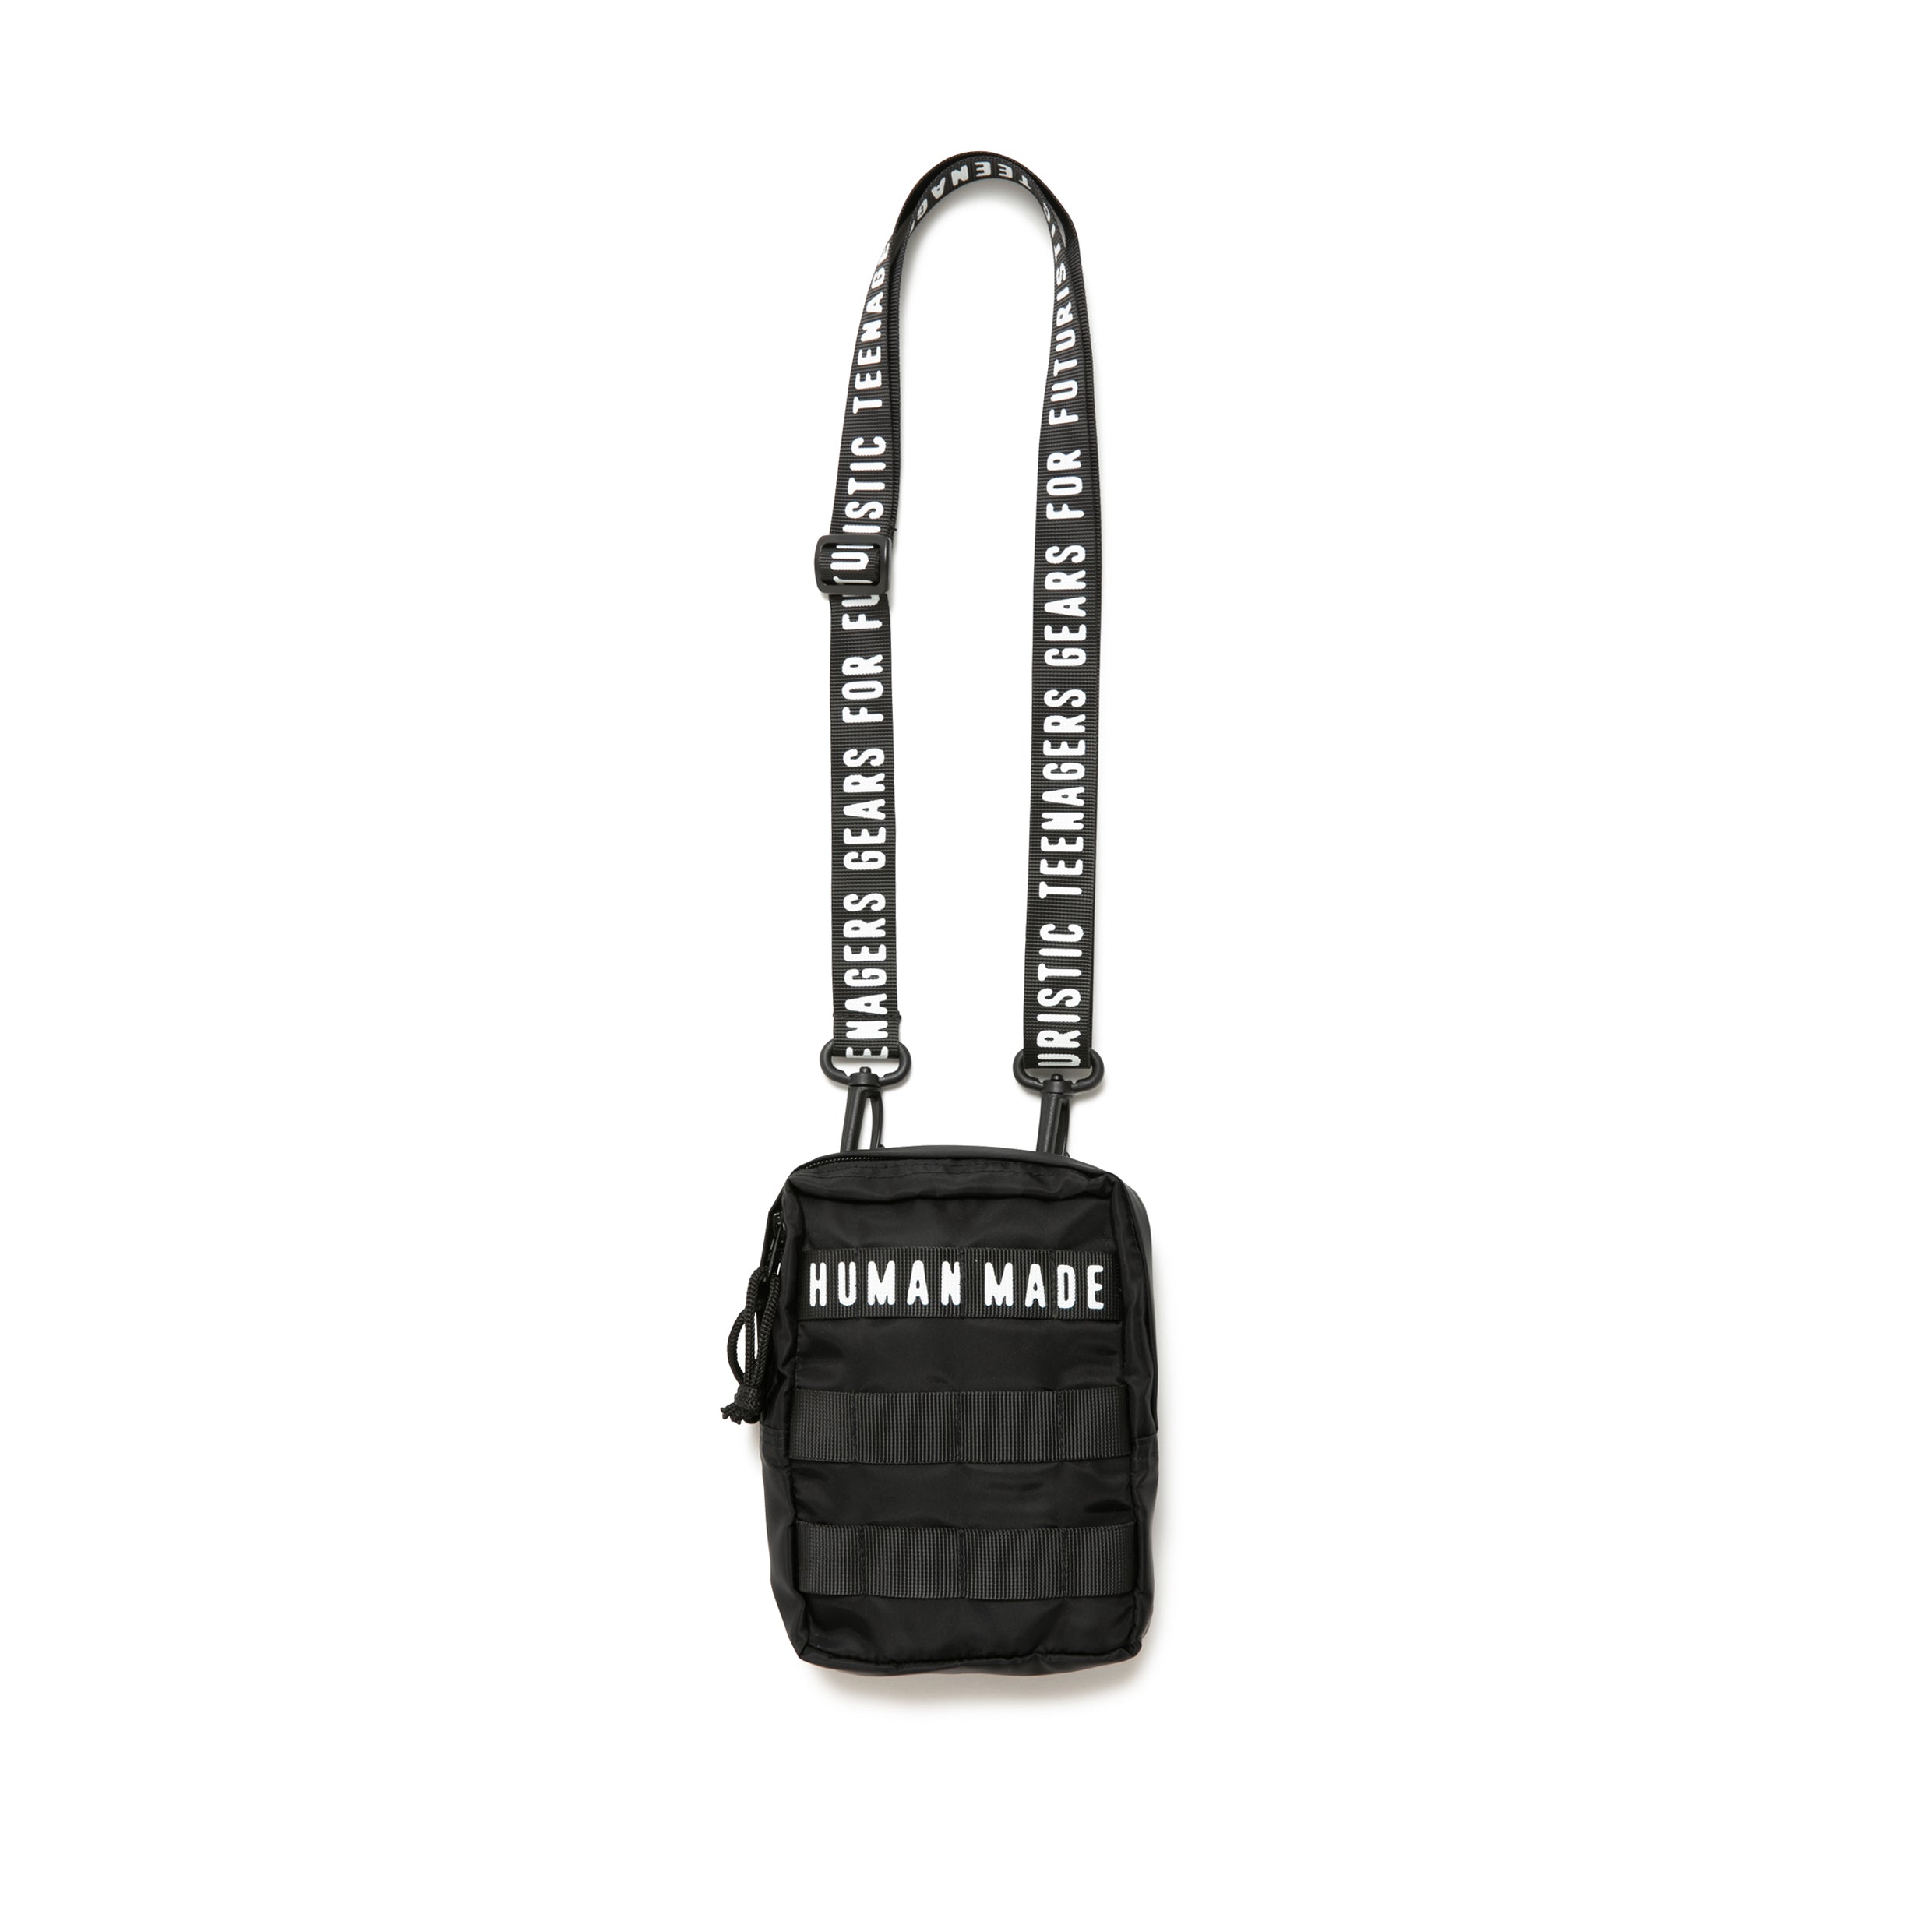 human made military pouch #2 (black) - a.plus store